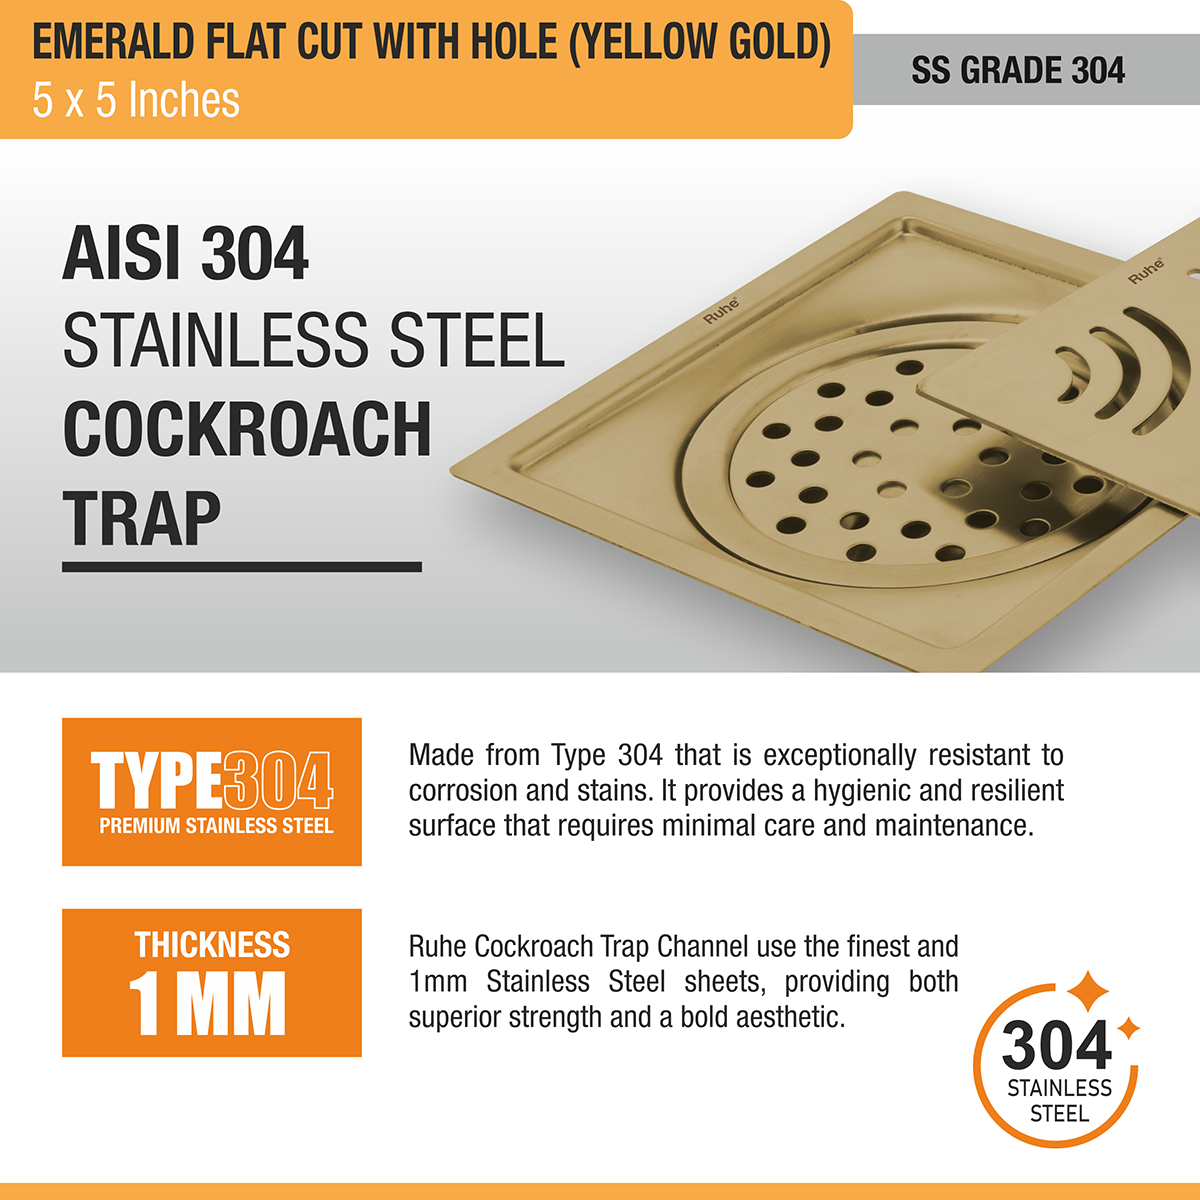 Emerald Square Flat Cut Floor Drain in Yellow Gold PVD Coating (5 x 5 Inches) with Hole stainless steel